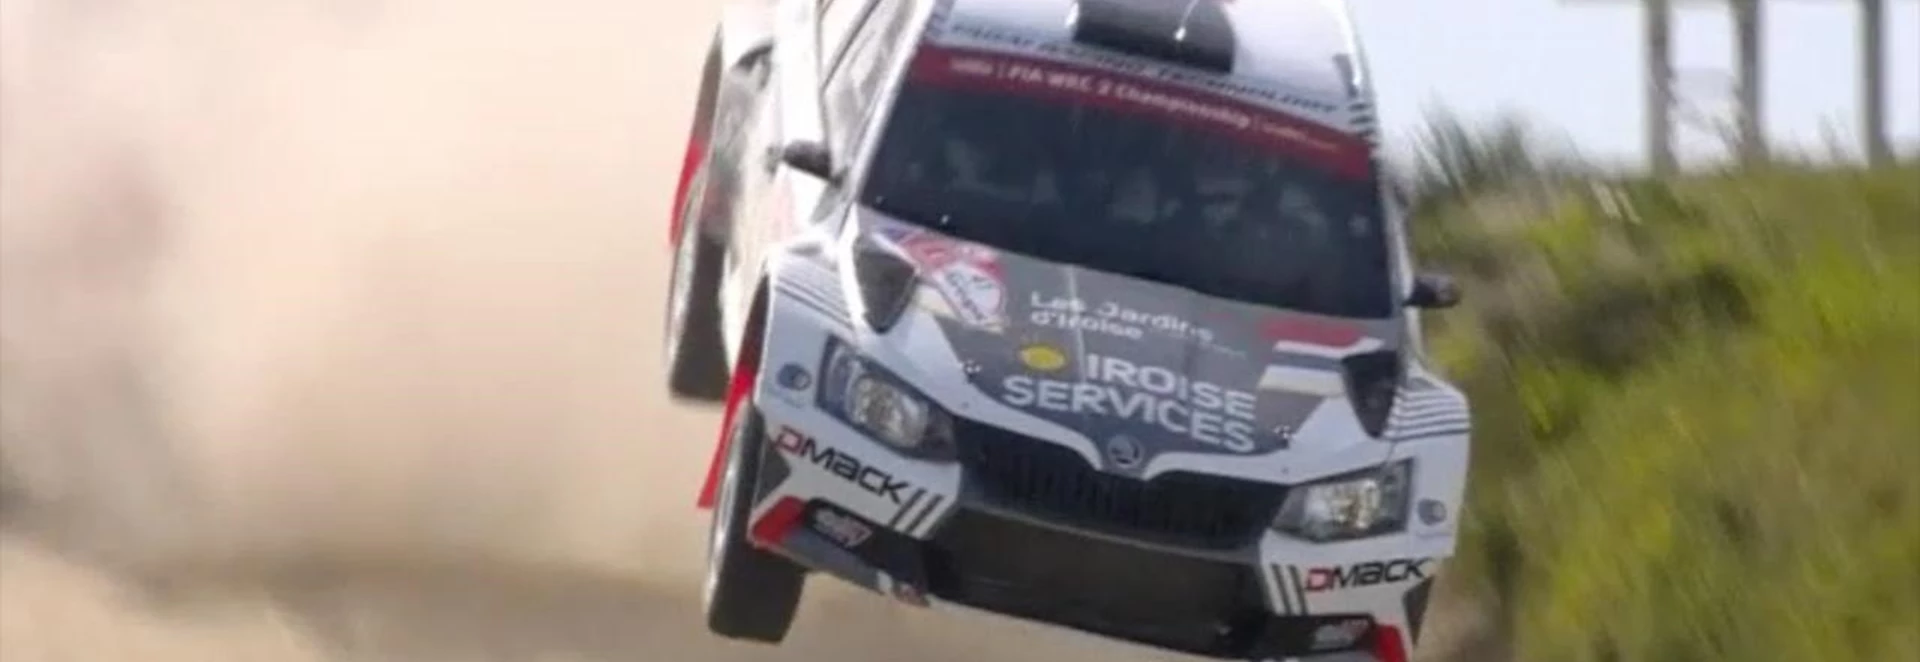 Don’t try this at home: rally driver faceplants his Skoda after jump goes wrong 